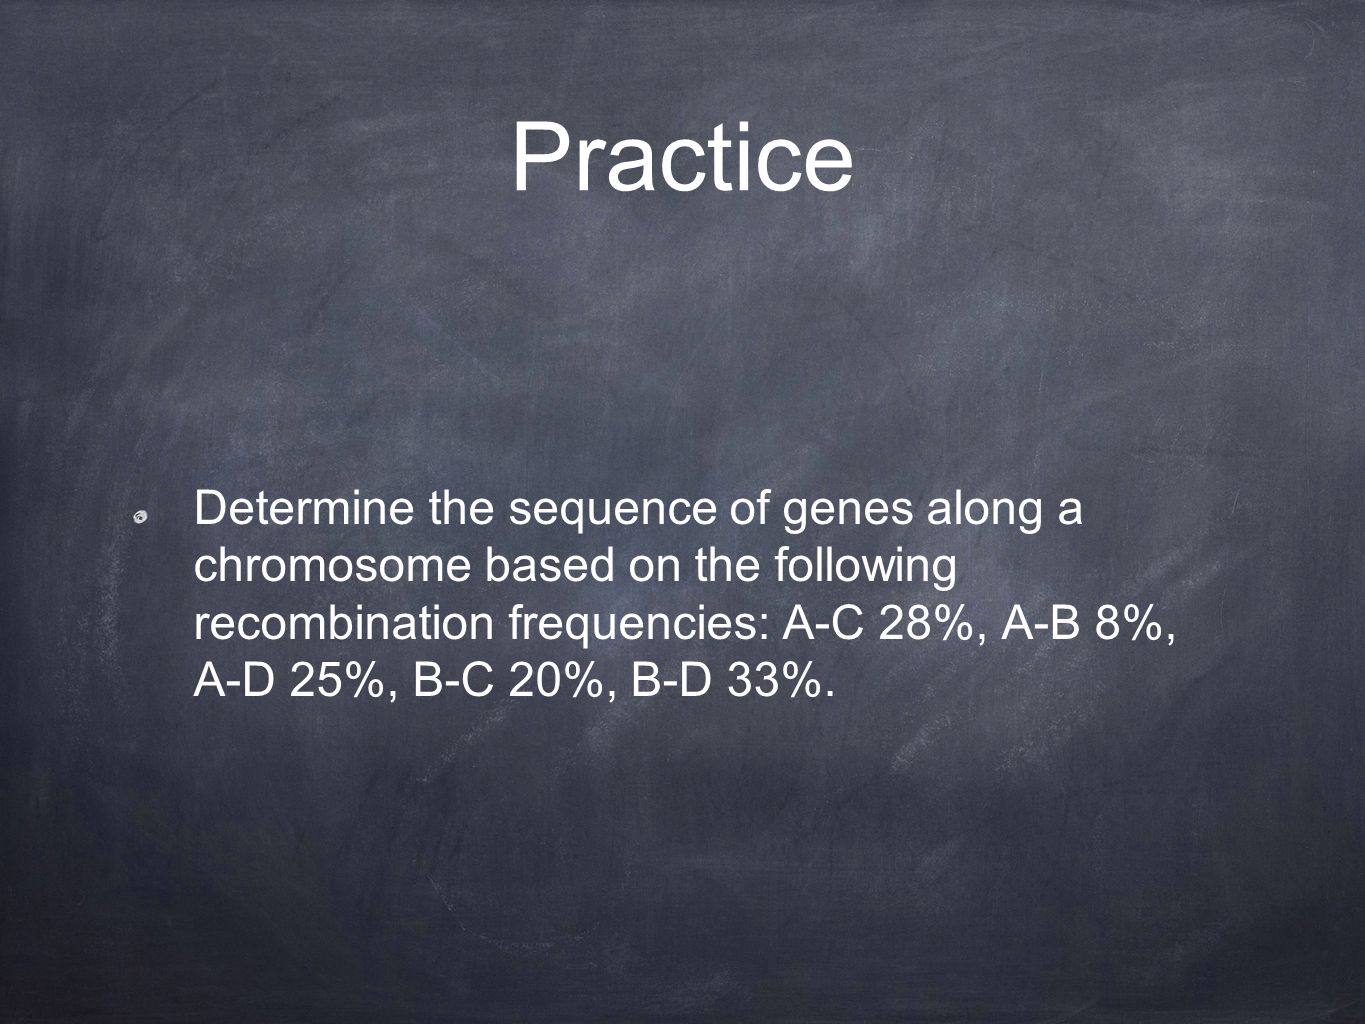 Practice Determine the sequence of genes along a chromosome based on the following recombination frequencies: A-C 28%, A-B 8%, A-D 25%, B-C 20%, B-D 33%.